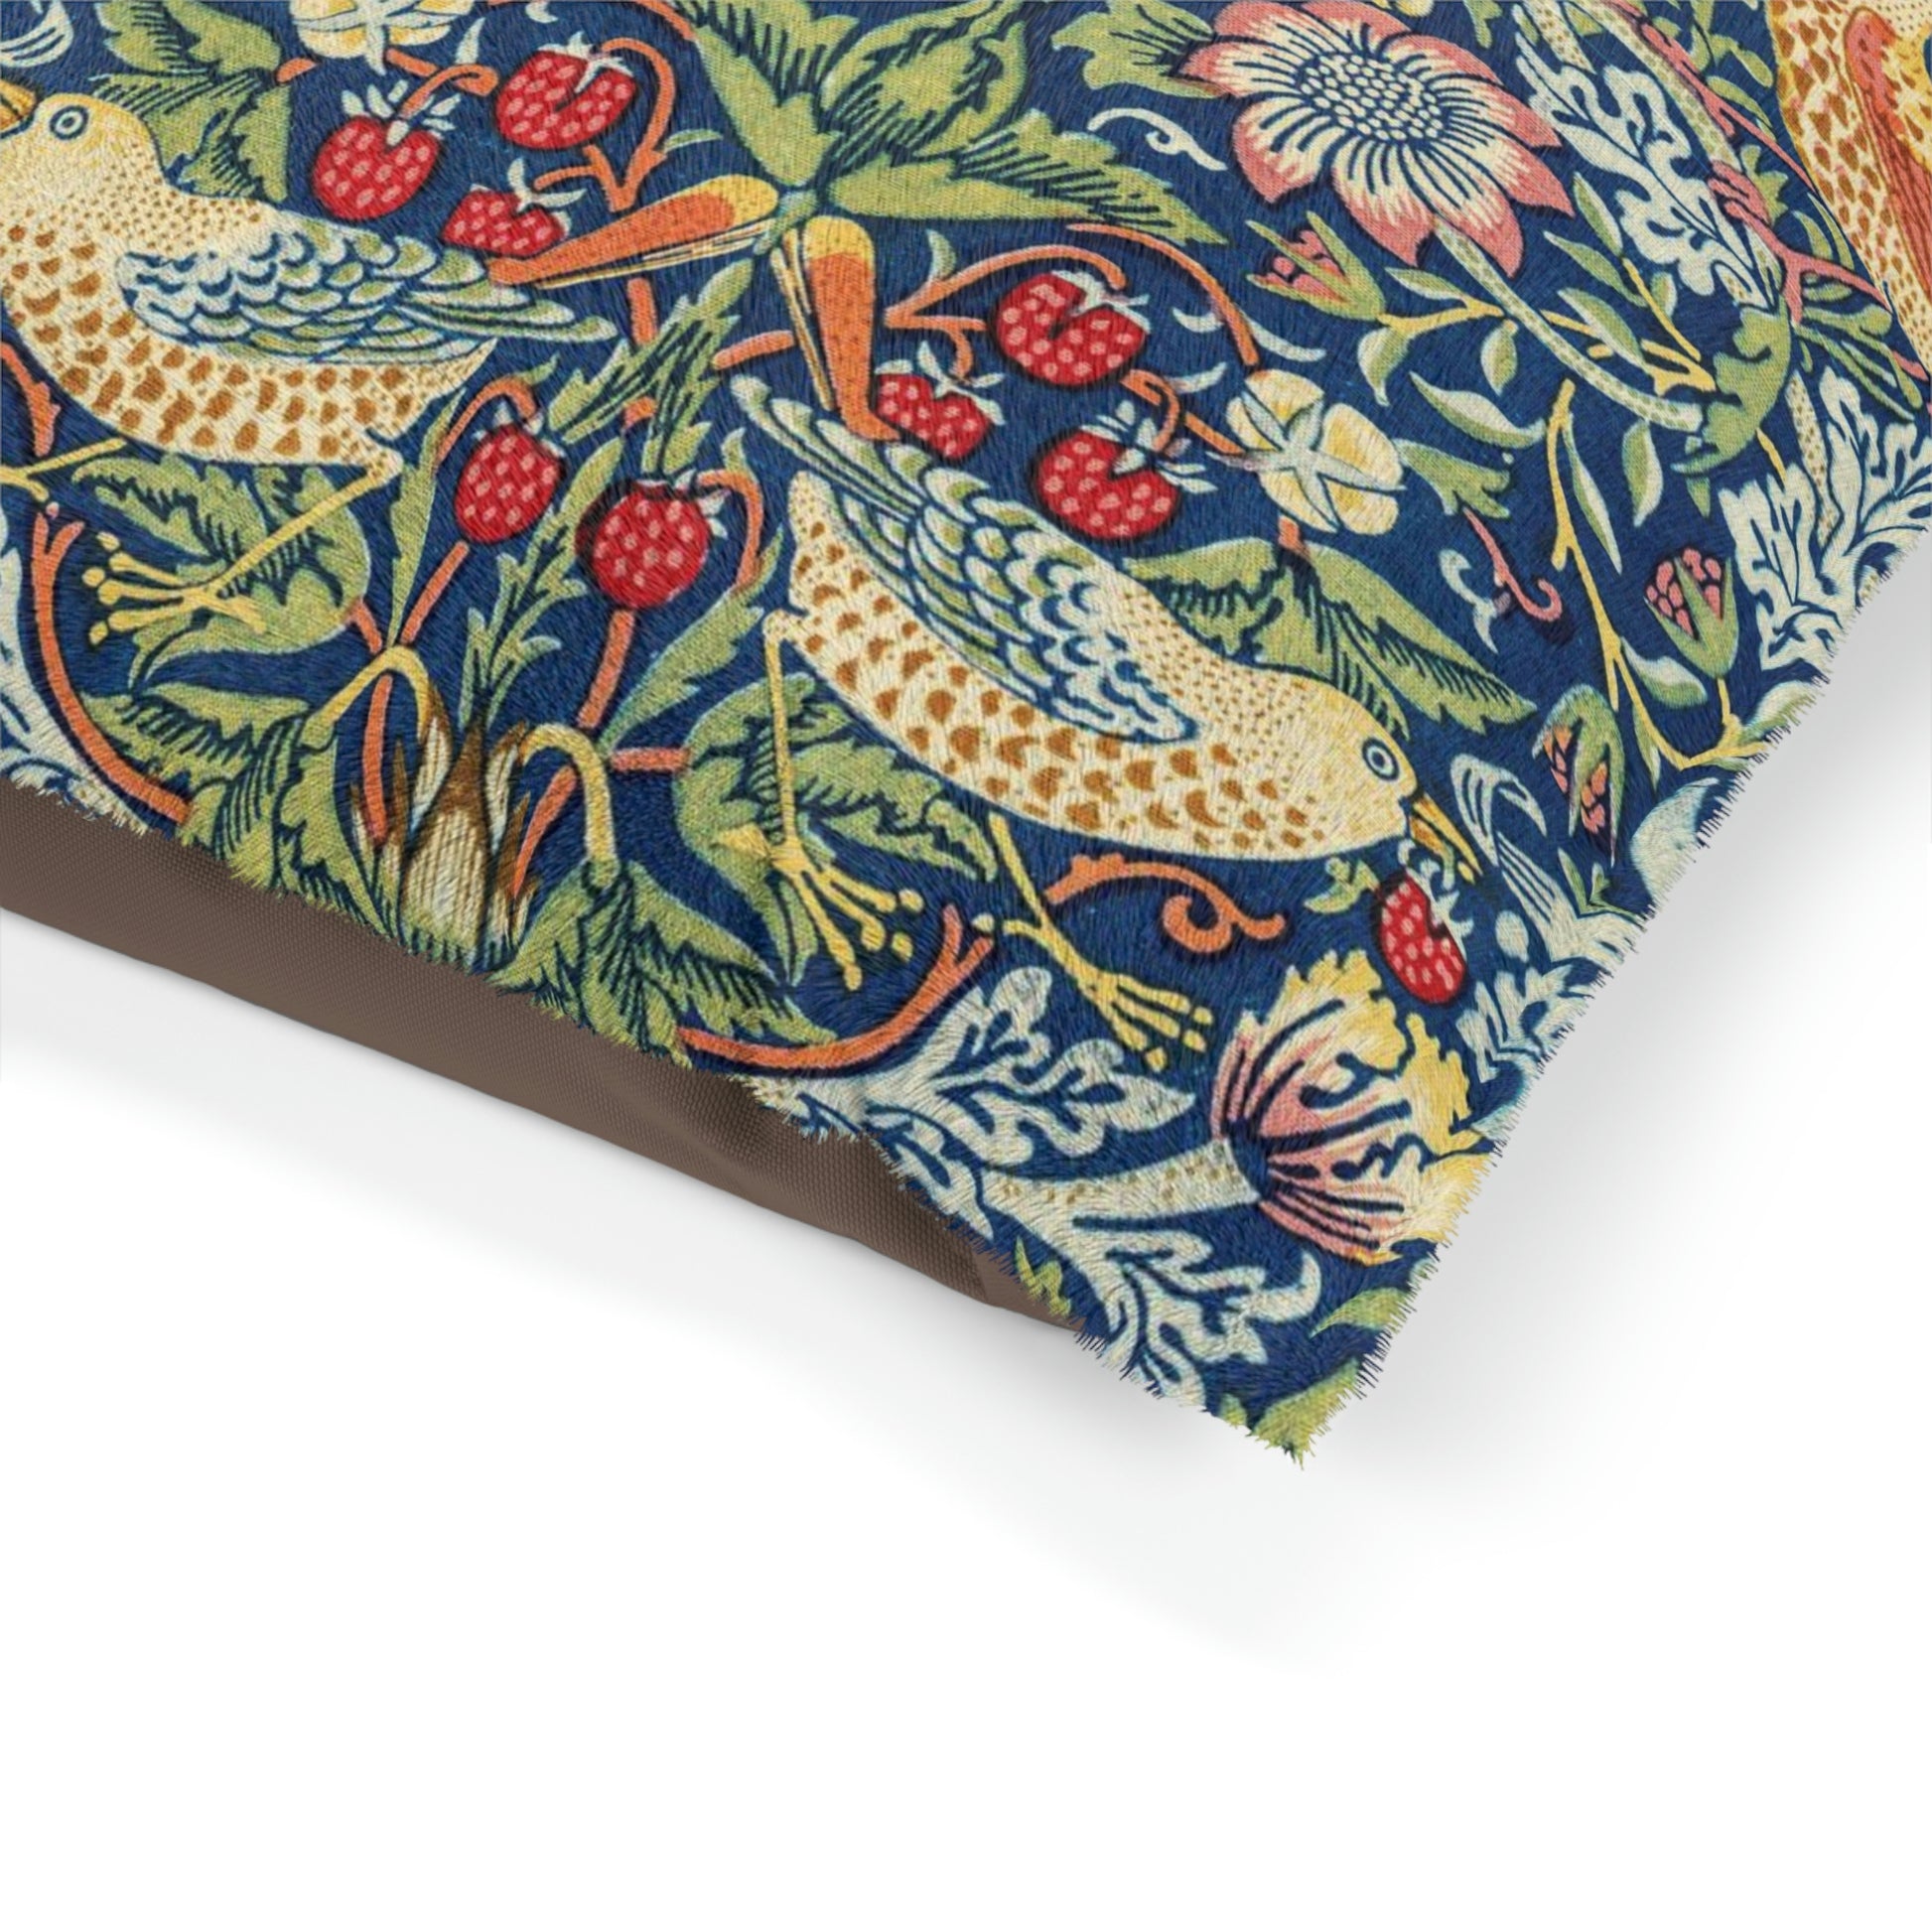 William-Morris-&-Co-Pet-Bed-Strawberry-Thief-Collection-2